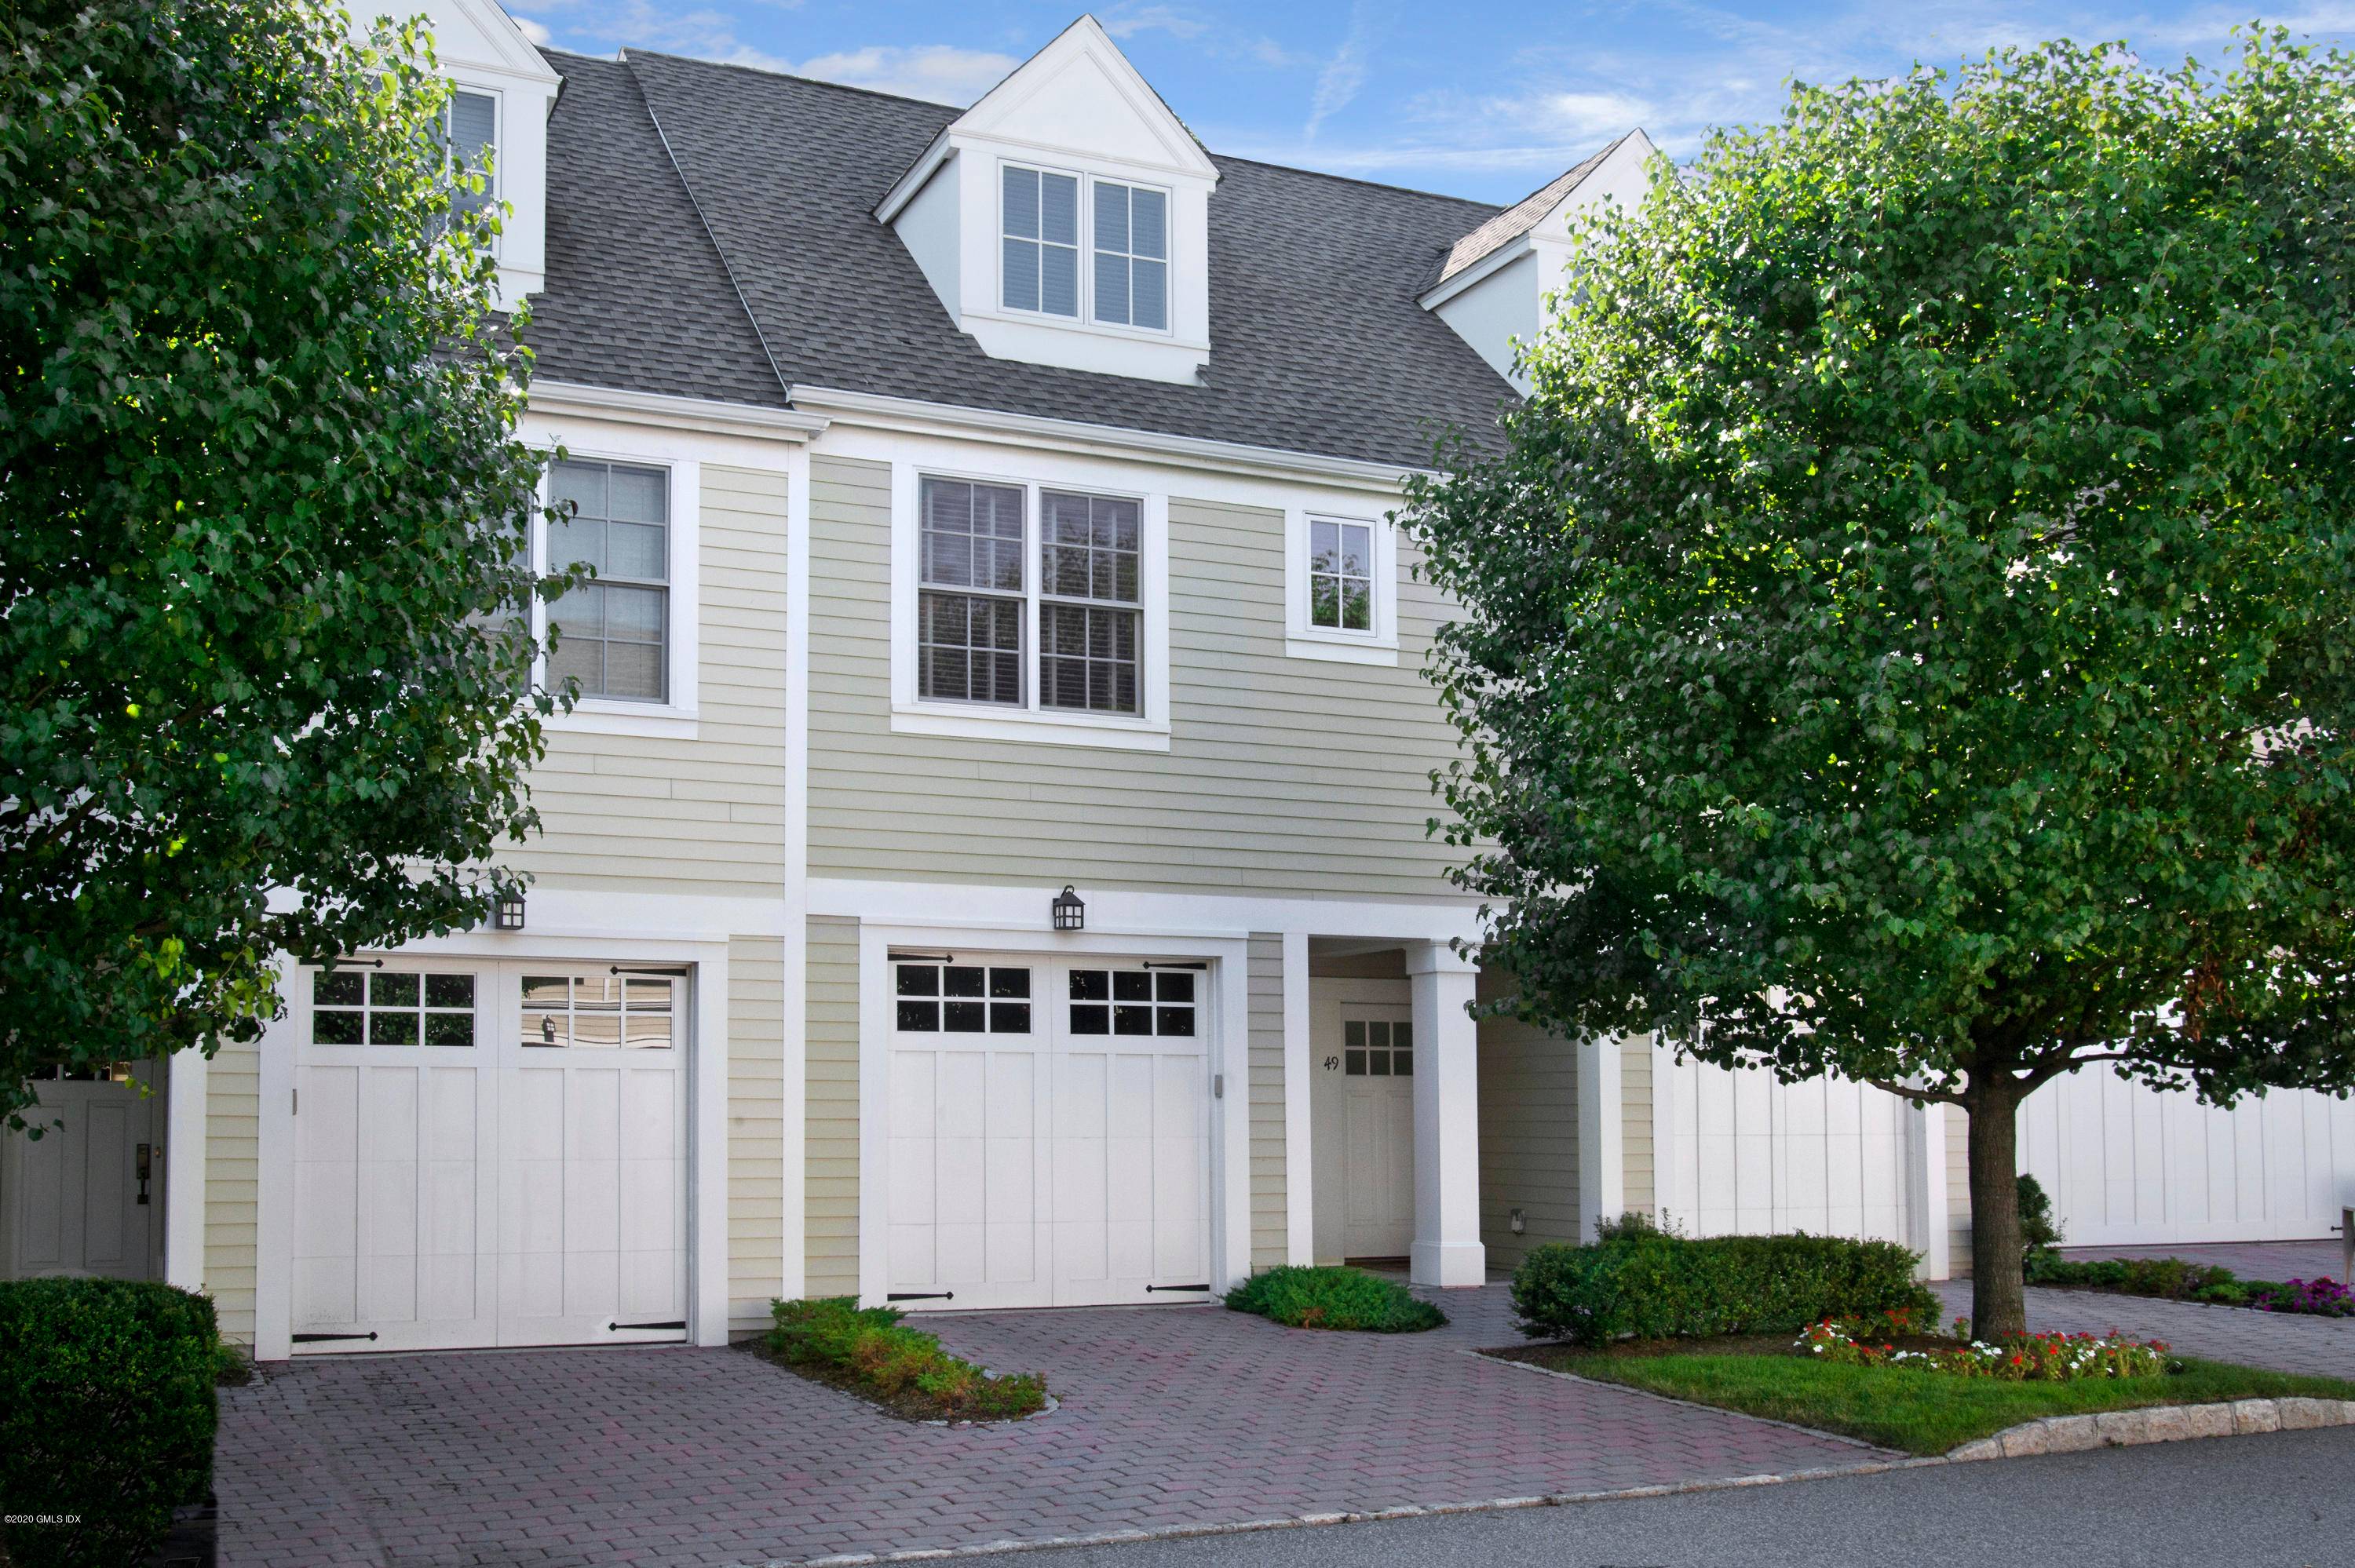 Sun filled and pristine townhouse in the private, gated Palmer Hill community located on the Old Greenwich Stamford border.